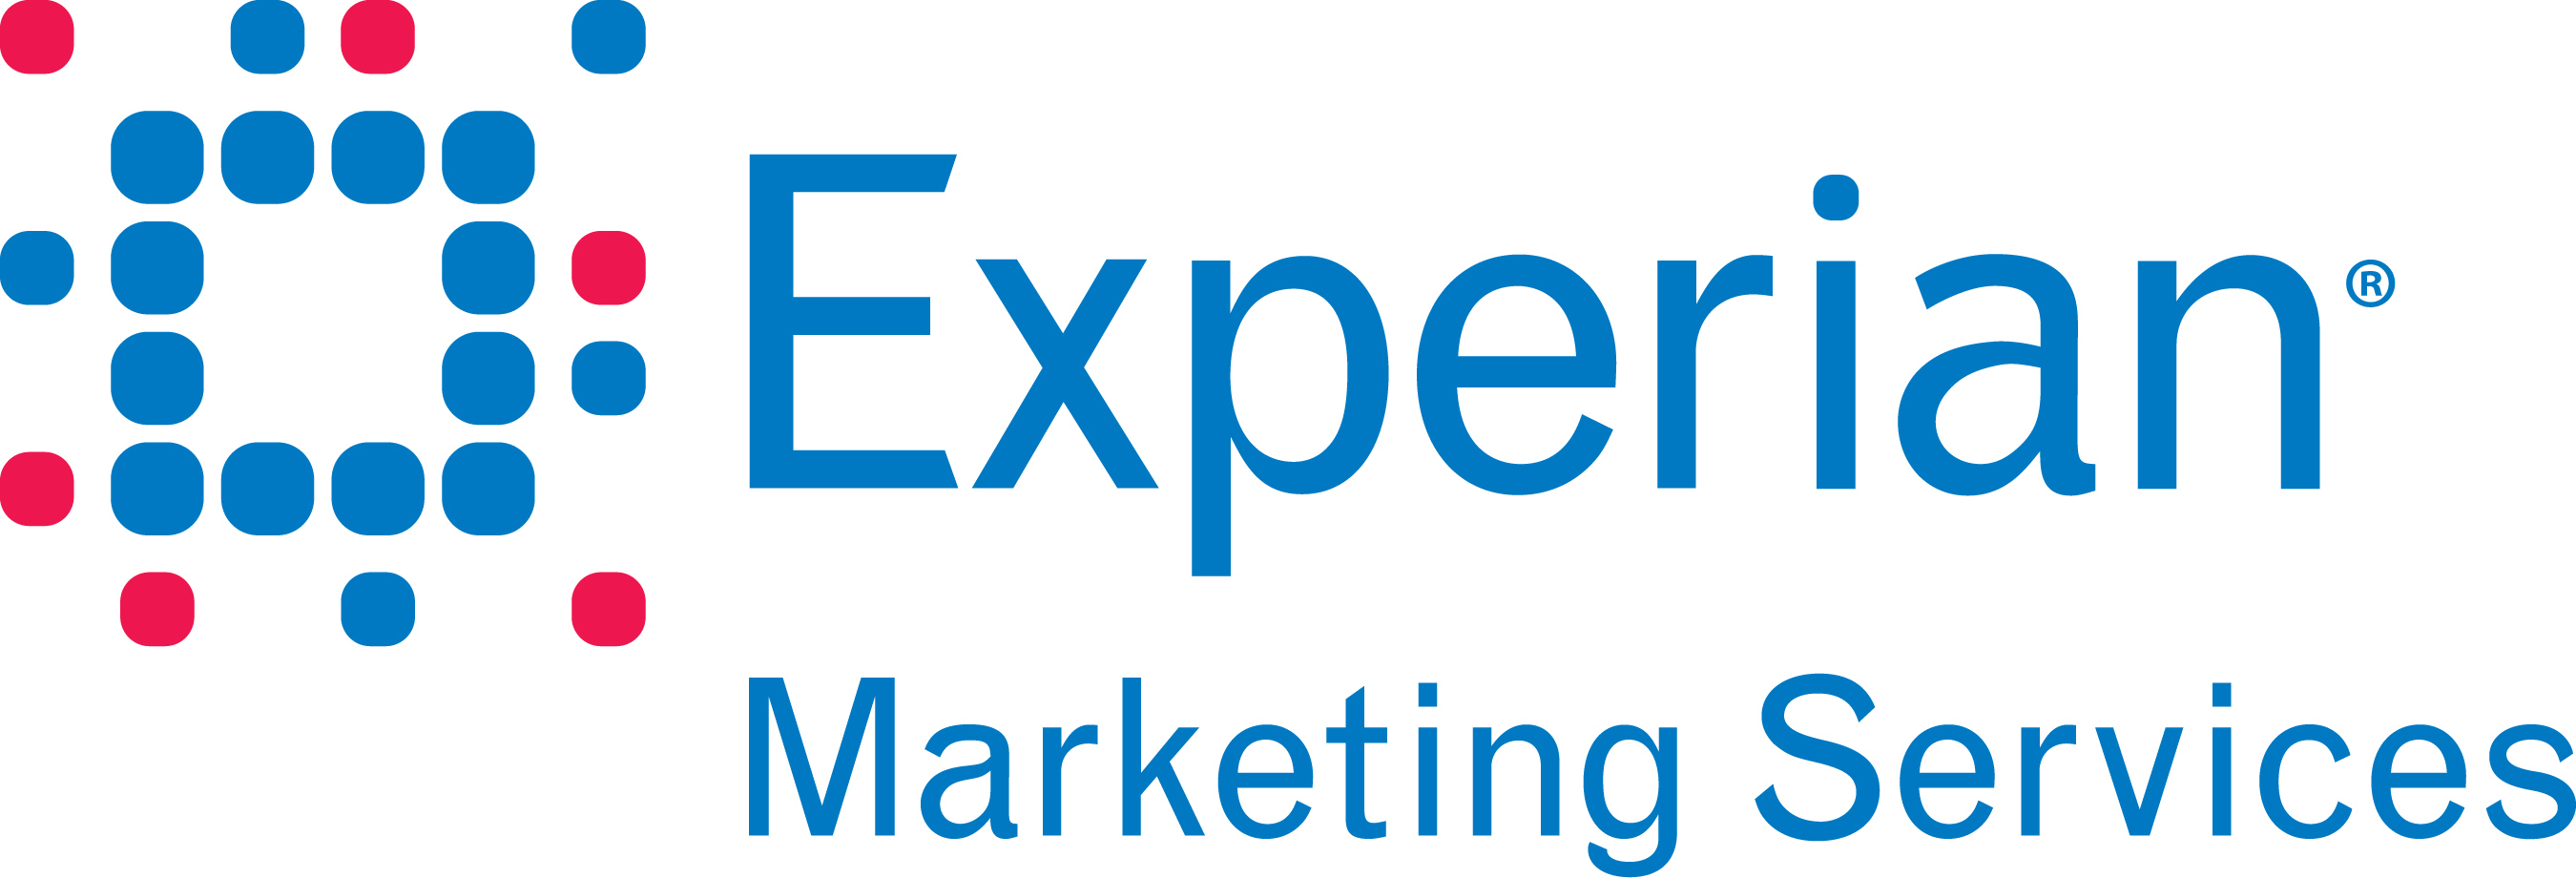 Experian Marketing Services.